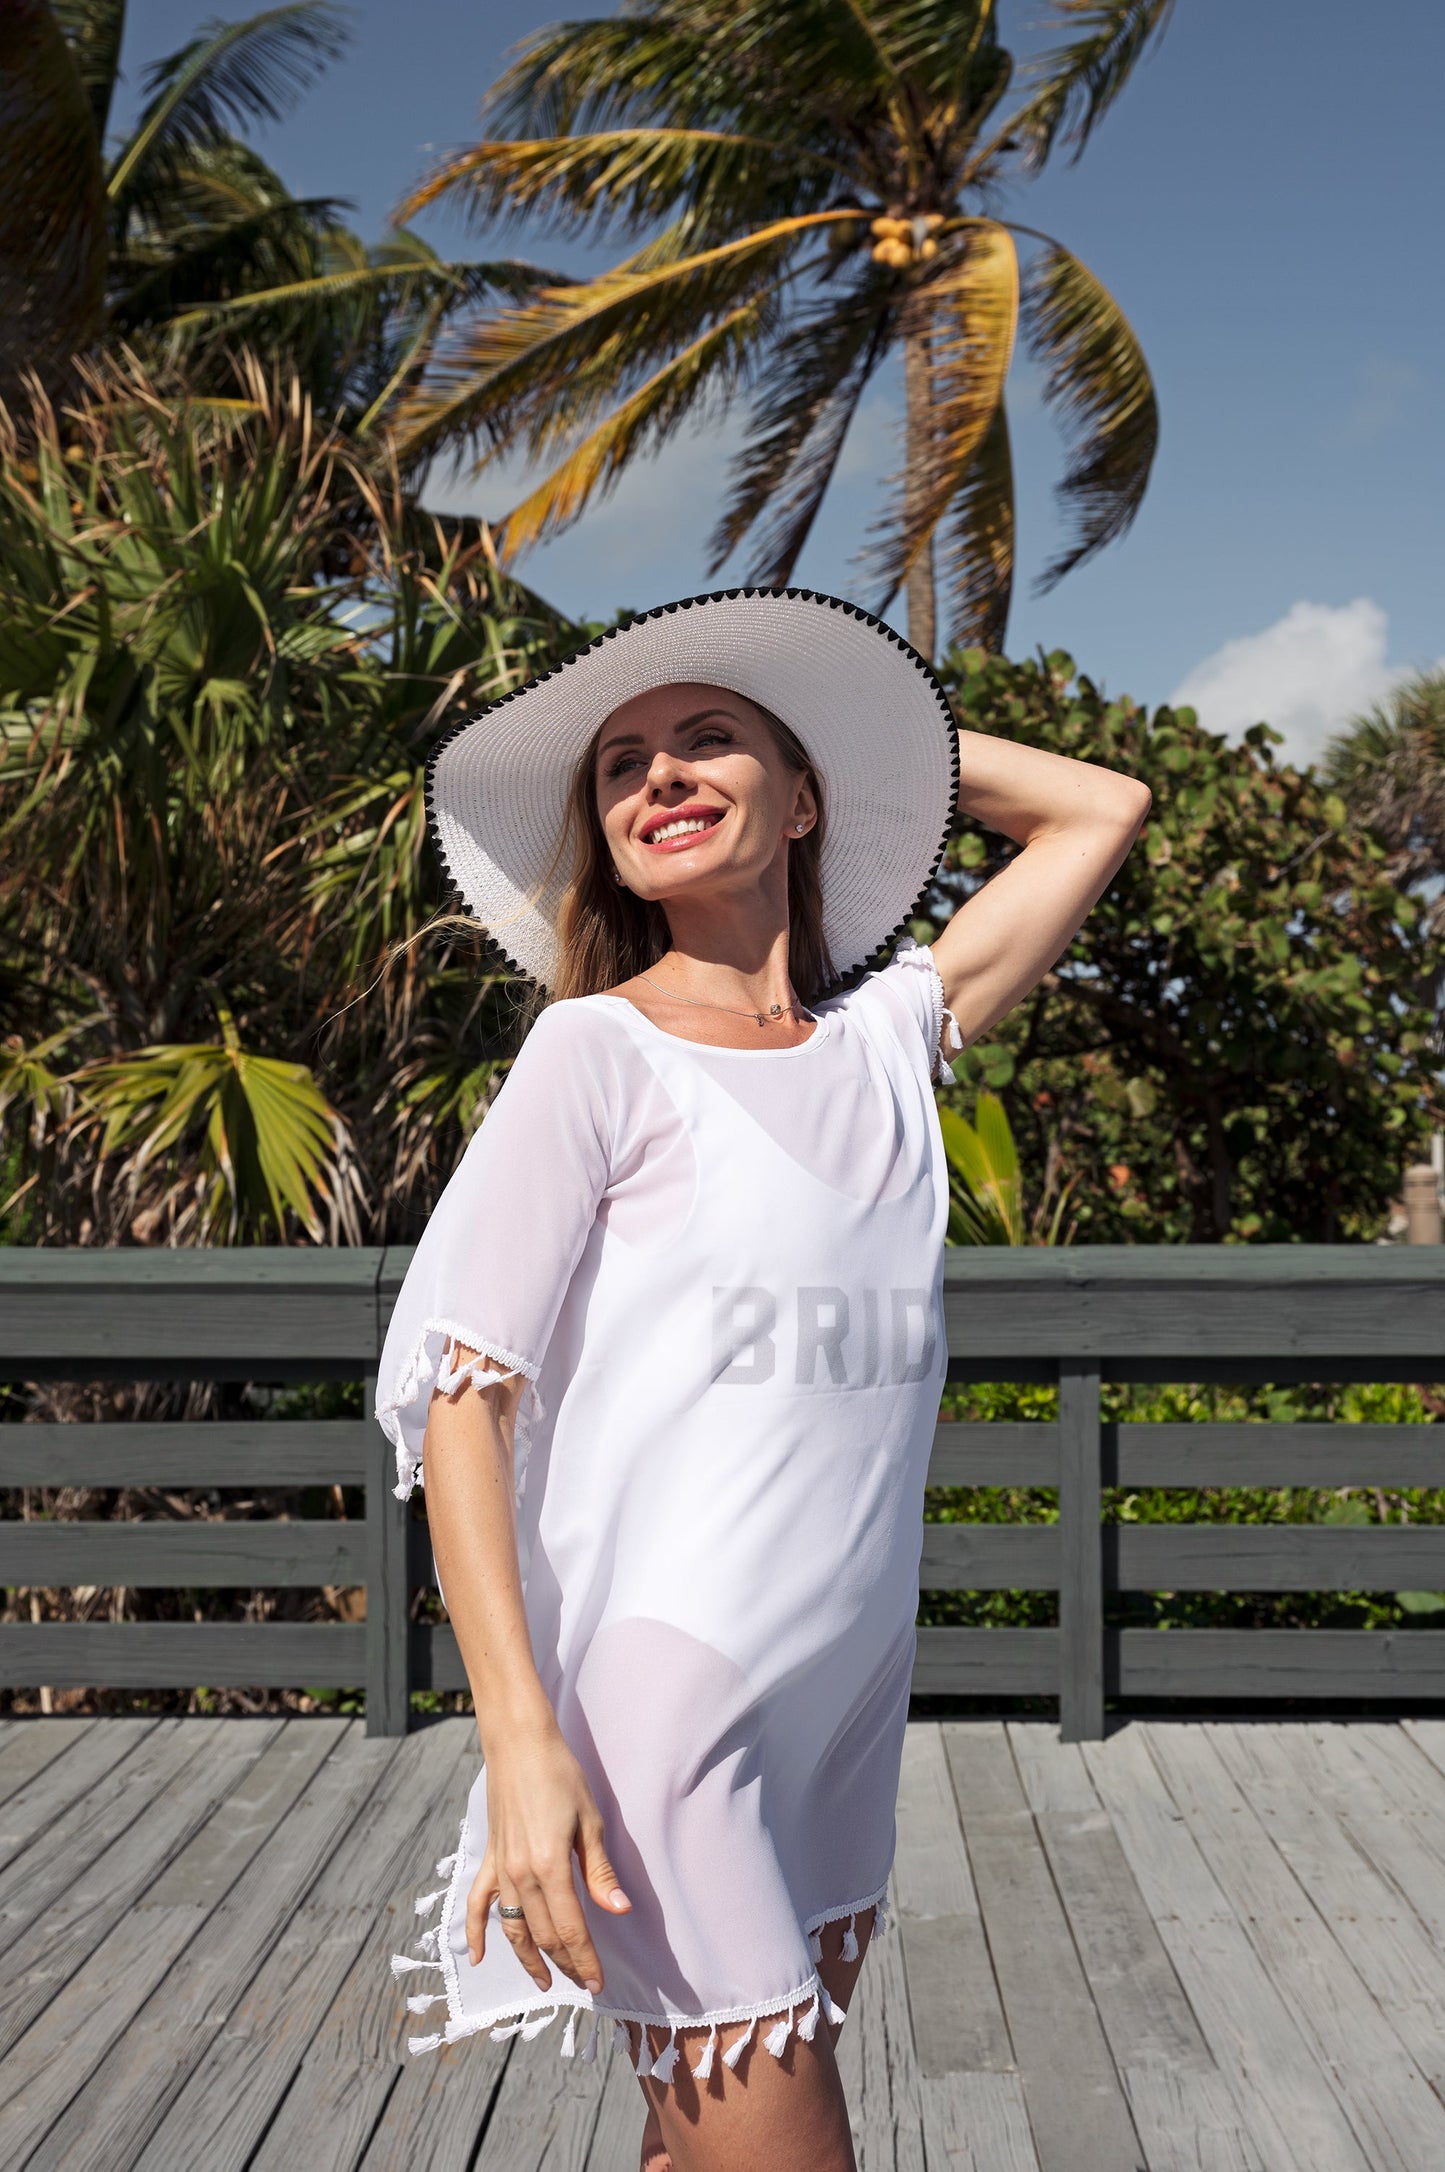 Women's Floppy Sun Hat with Pearl